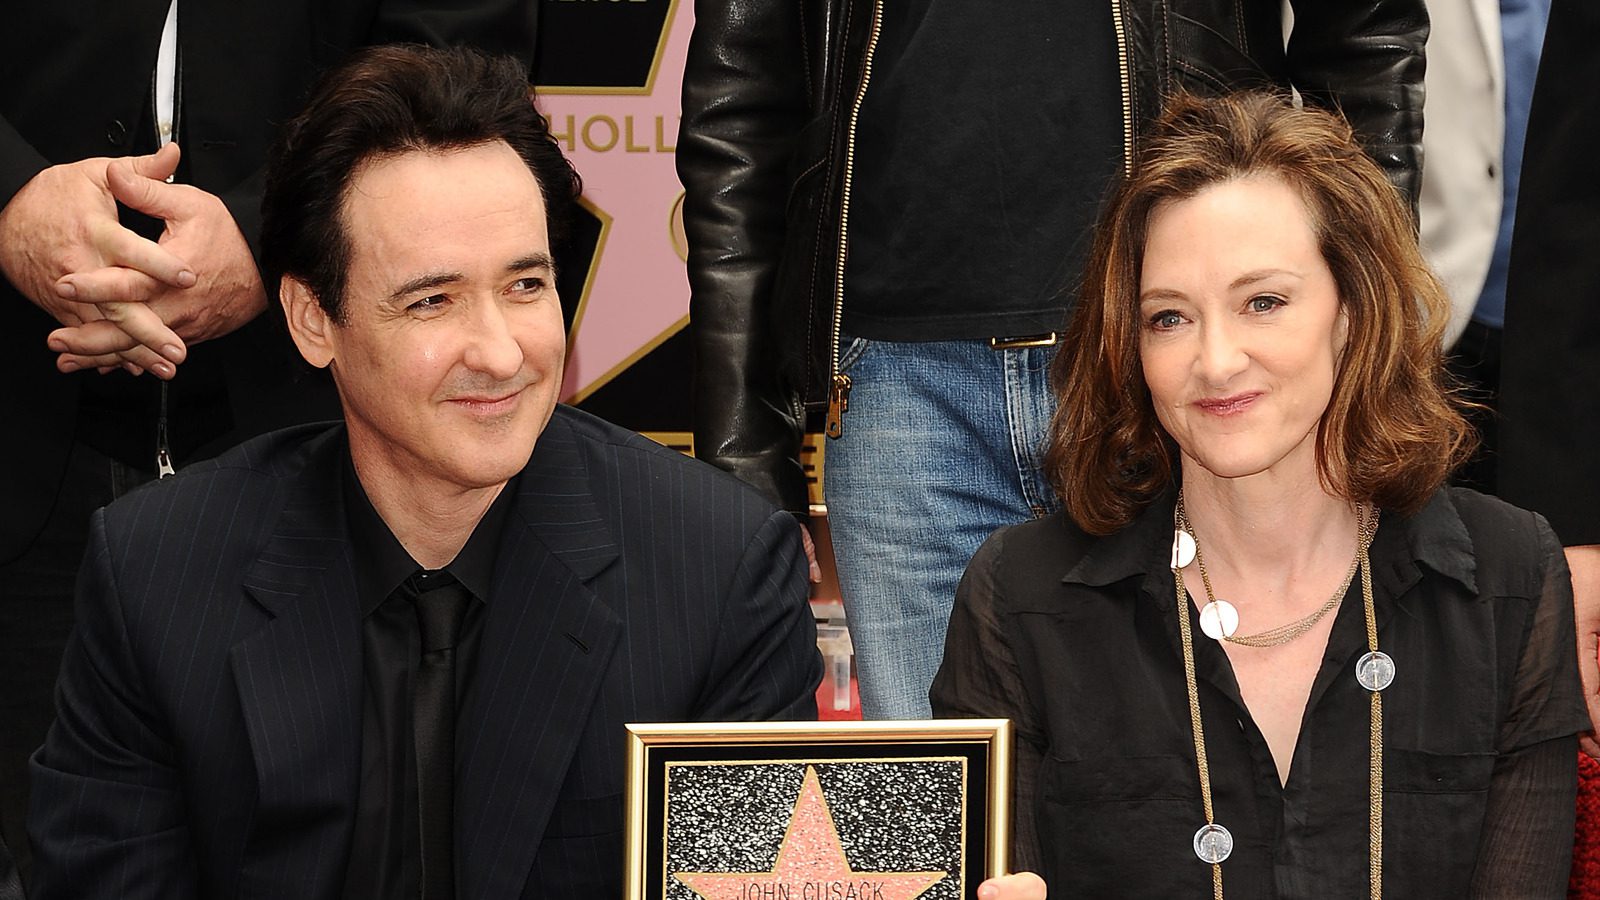 Every Movie John Cusack & Joan Cusack Made Together